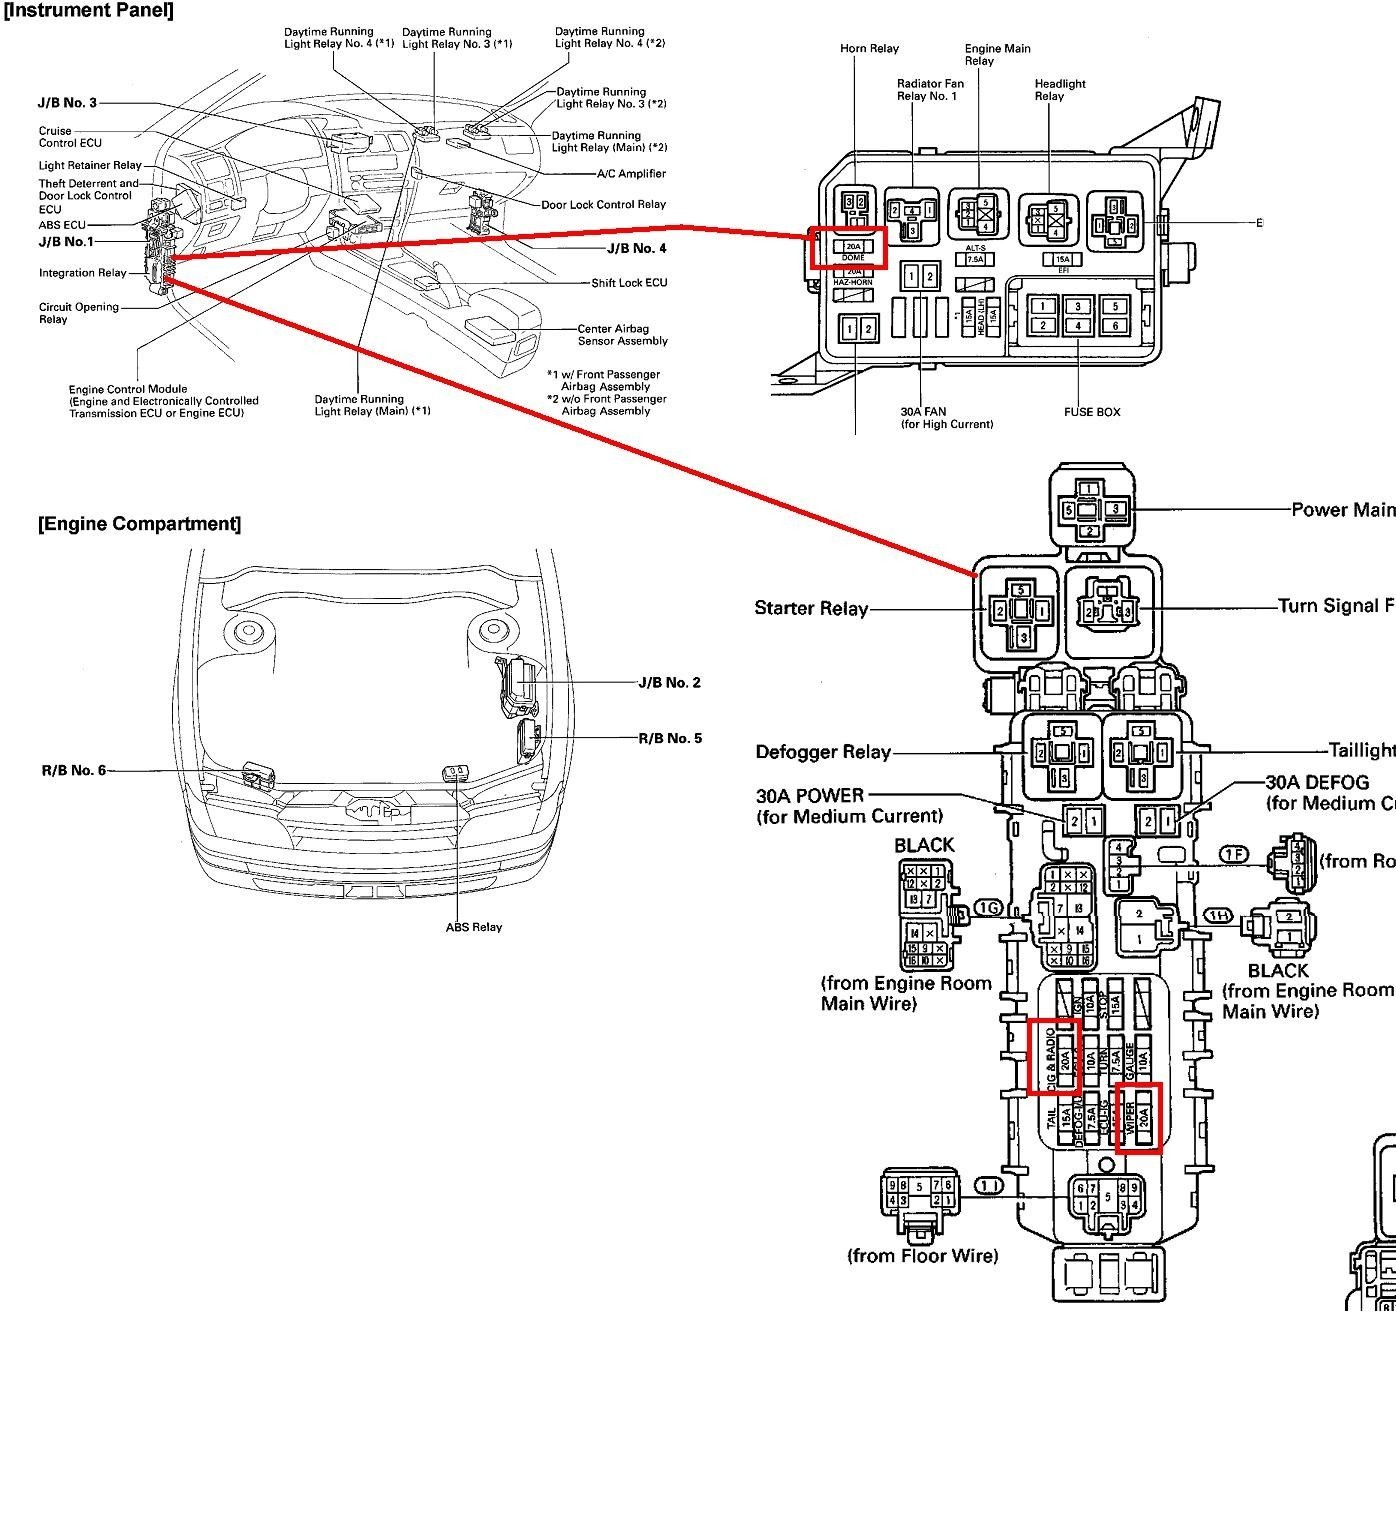 2004 toyota Camry Engine Parts Diagram 2004 Corolla Wiring Harness Another Blog About Wiring Diagram • Of 2004 toyota Camry Engine Parts Diagram